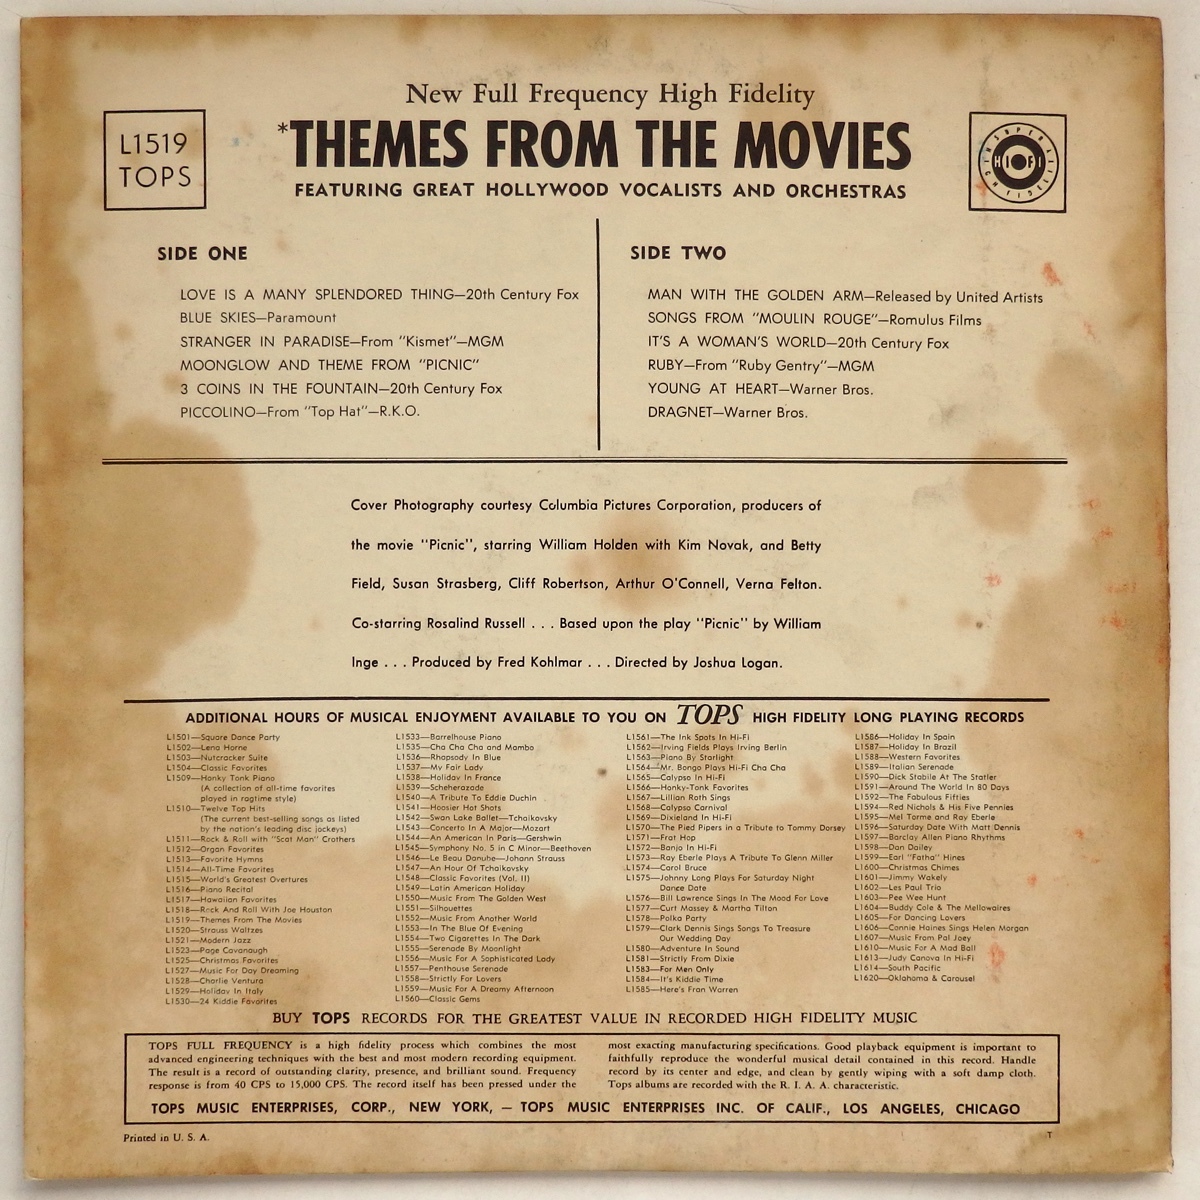 LP THEMES FROM THE MOVIES FEATURING GREAT HOLLYWOOD VOCALISTS AND ORCHESTRAS TOPS L1519 米盤_画像2